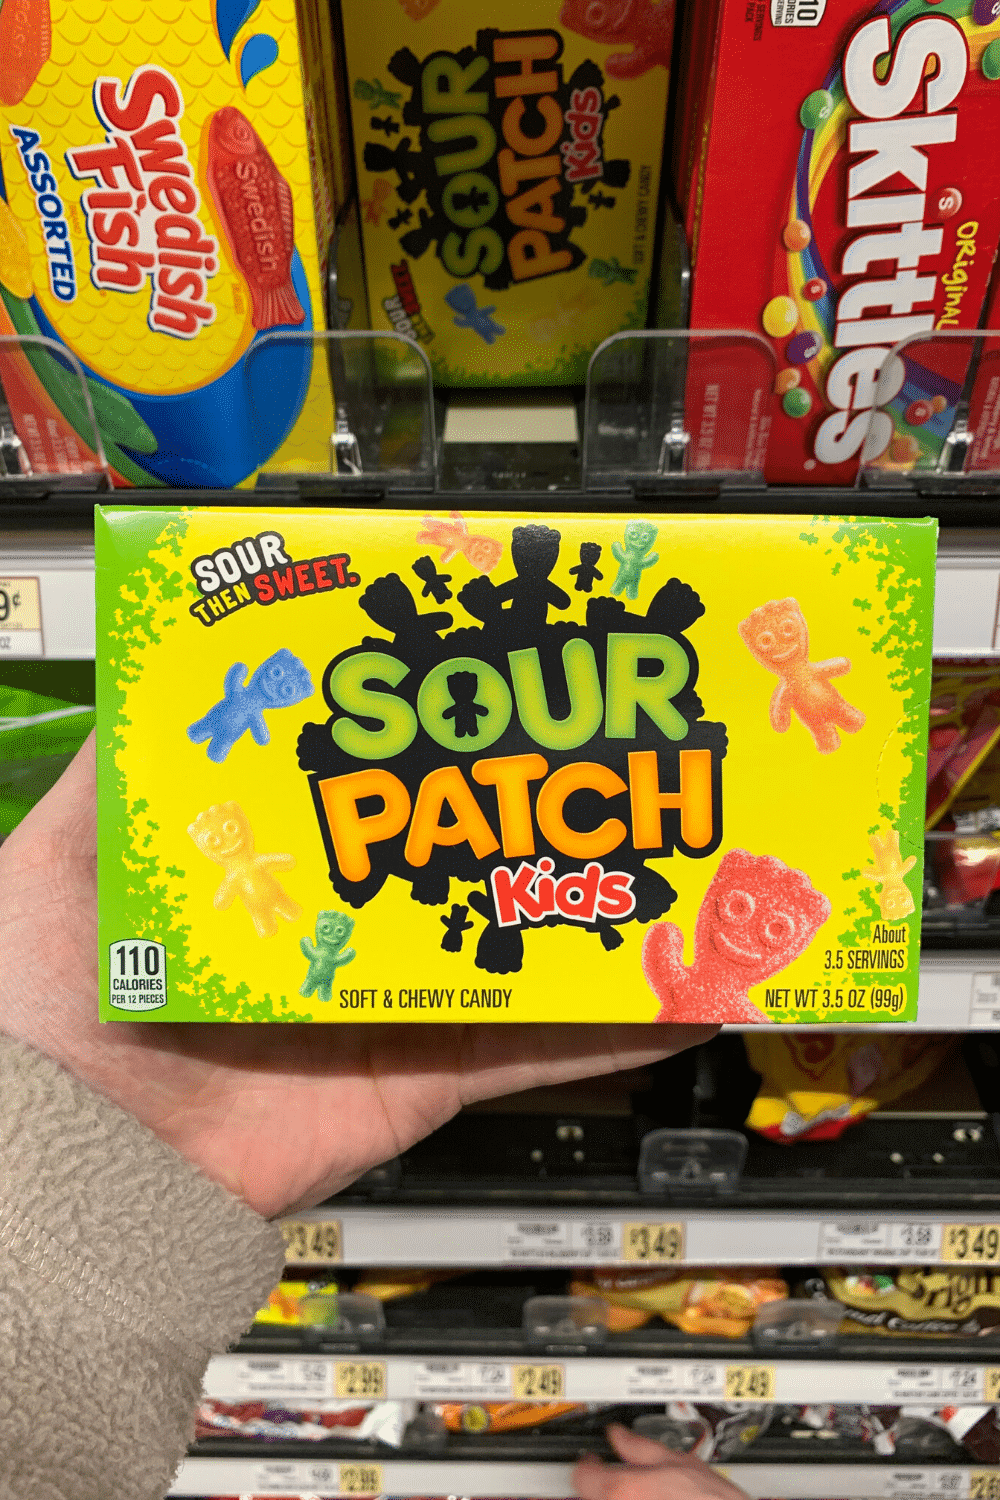 A hand holding a pack of sour patch kids